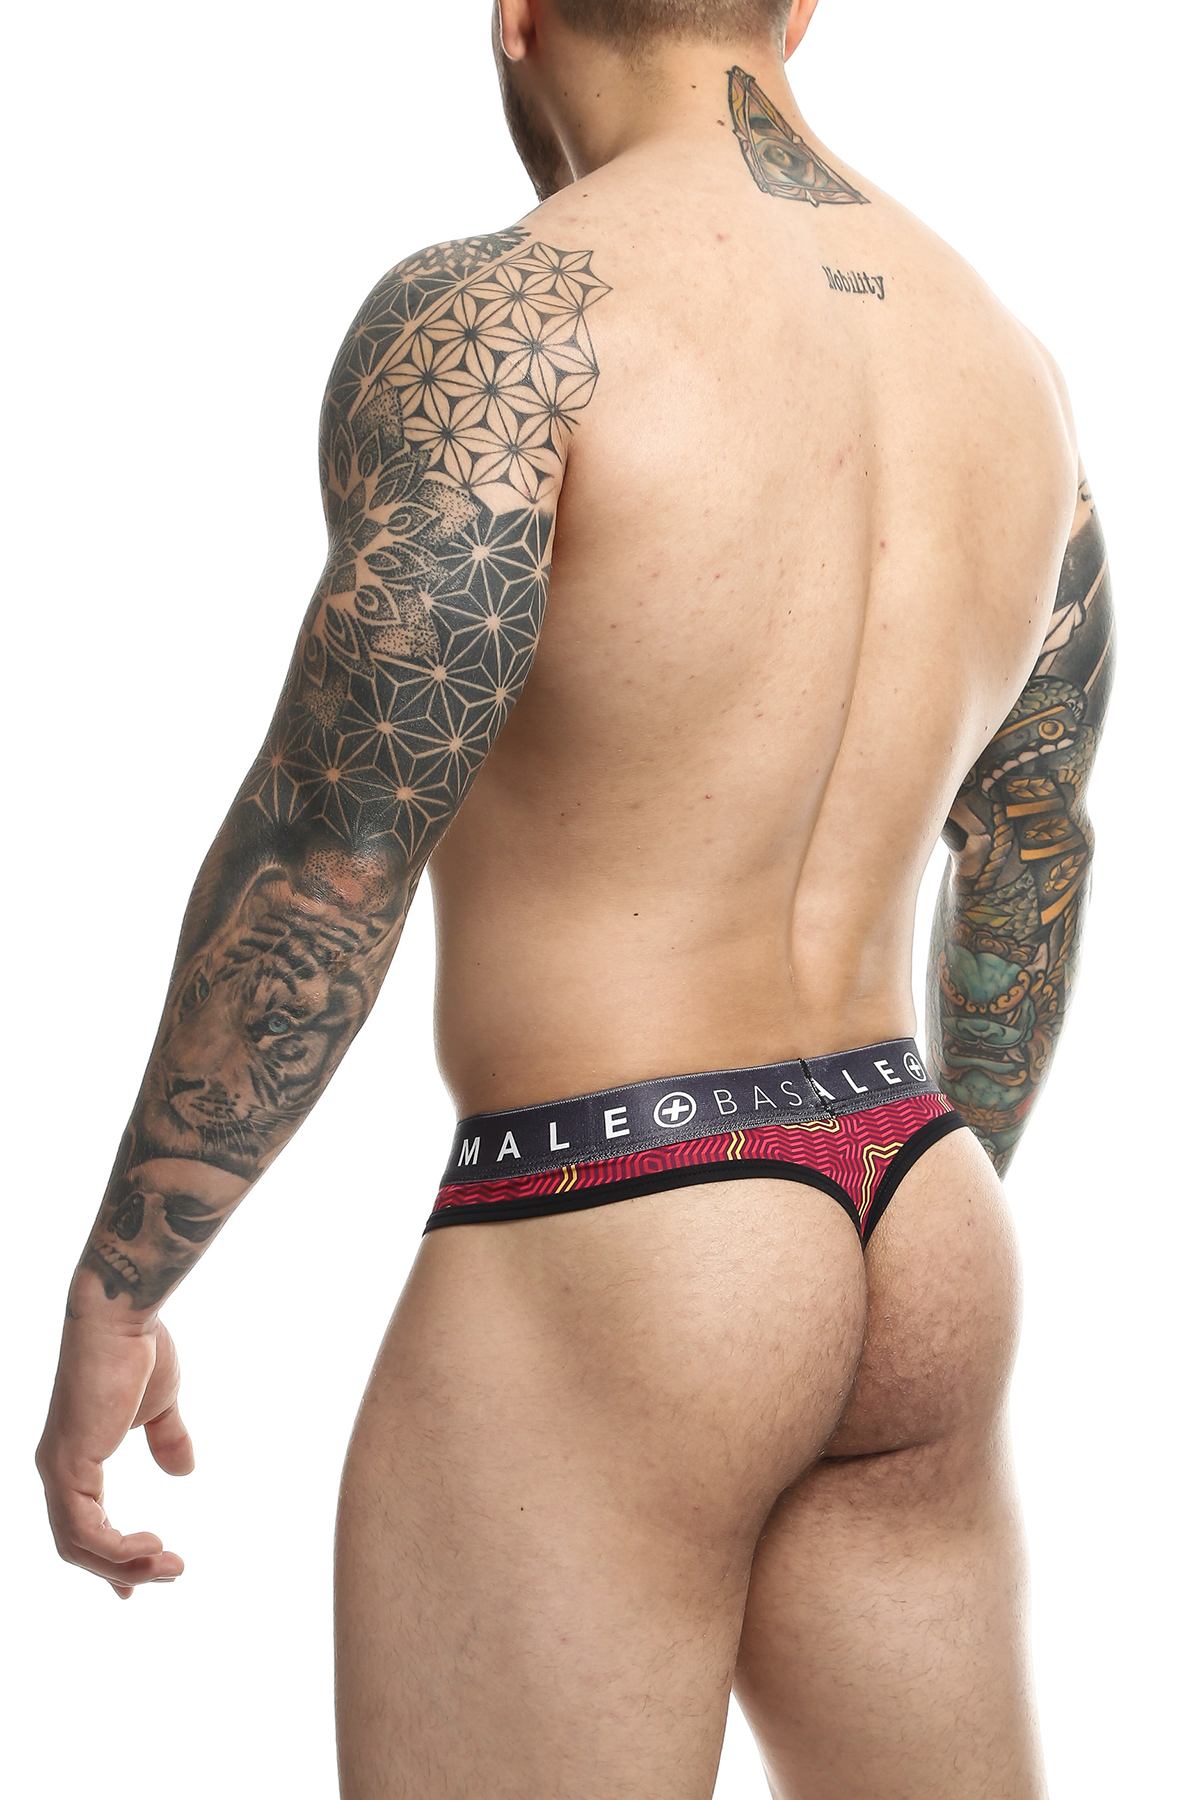 Male Basics Red Tweed Sexy Pouch Thong